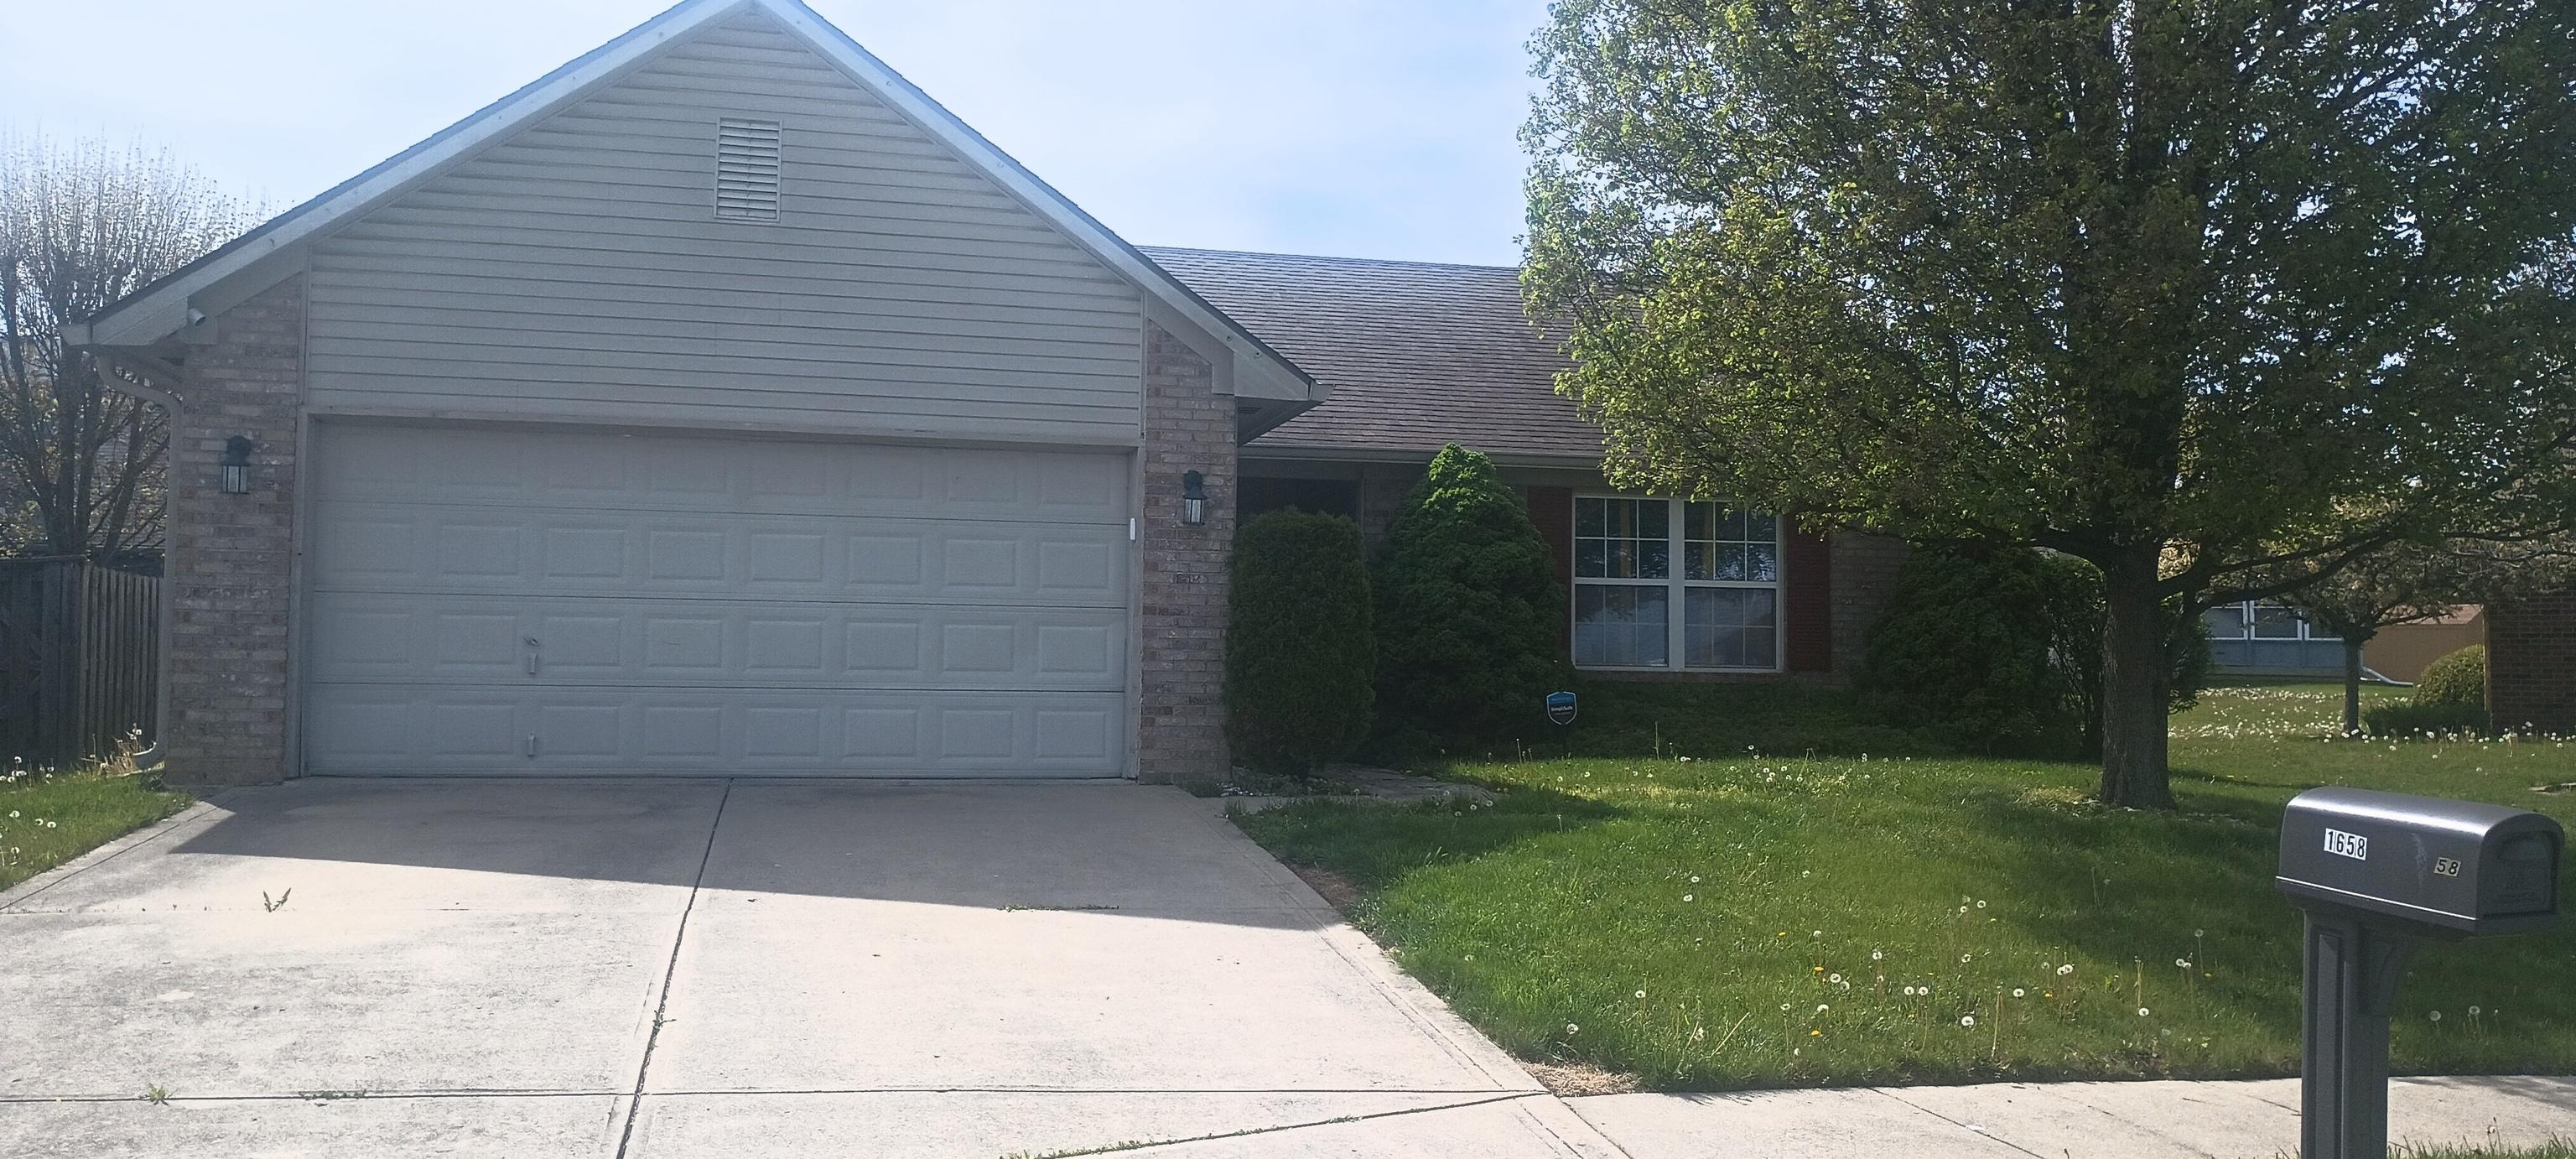 Photo one of 1658 Park Hill Dr Indianapolis IN 46229 | MLS 21974703